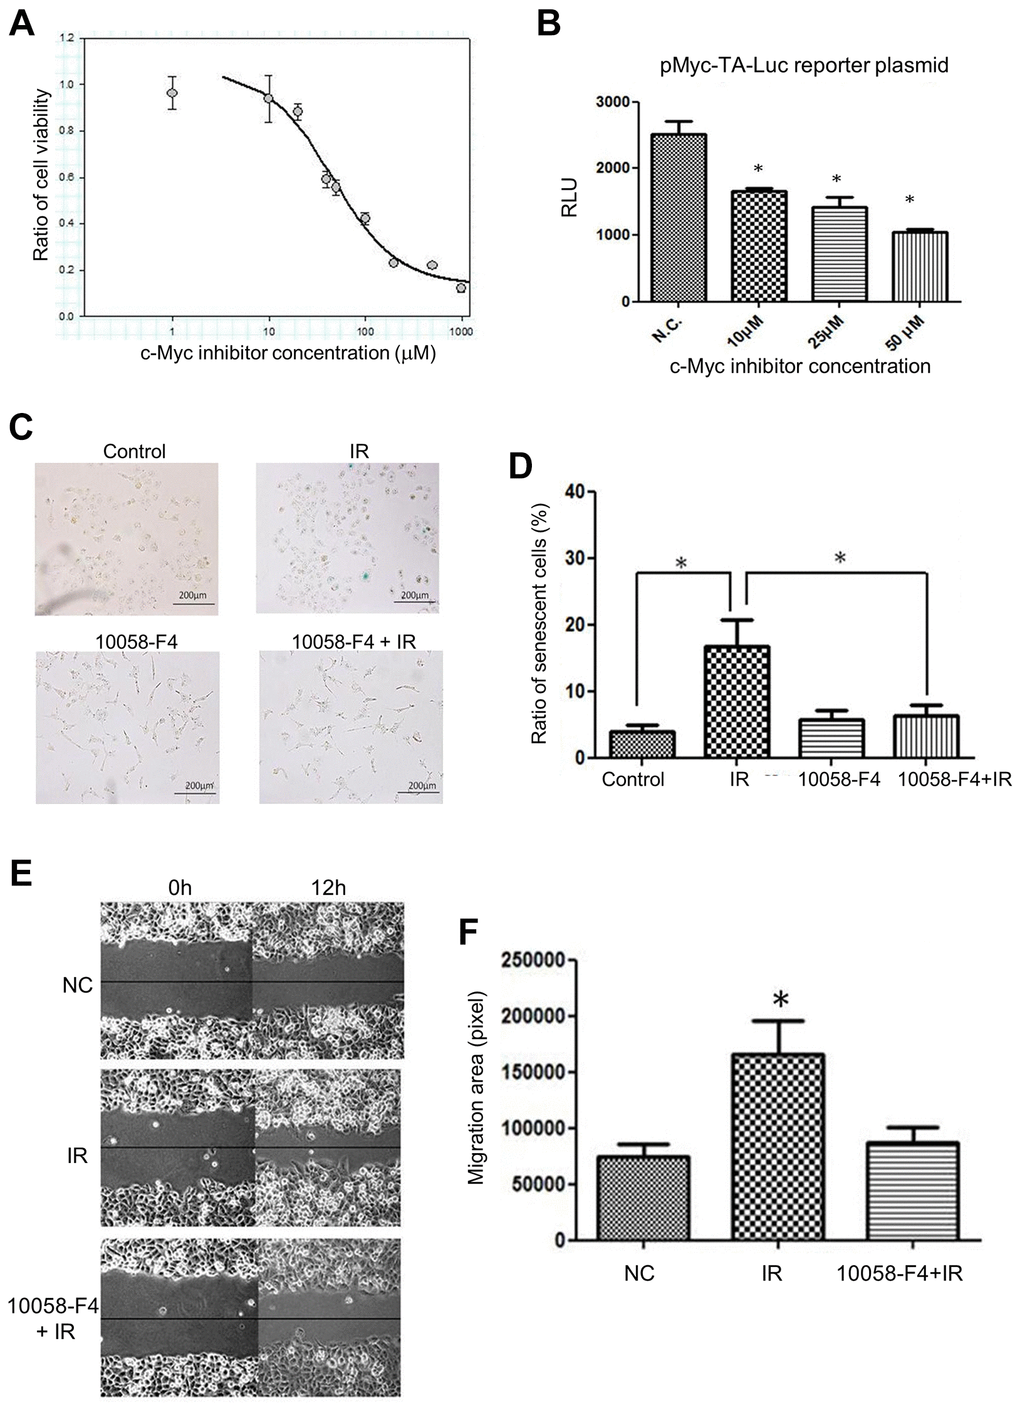 Effects of c-Myc inhibitor (10058-F4) on LDR induced senescence and unirradiated cell migration. (A) Cell survival curve of H1299 cells treated with increased dose of 10058-F4. (B) Luciferase reporter gene assay for demonstrating the effects of 10058-F4 on suppressing c-Myc transcriptional activity in H1299 cells. (C) 10058-F4 suppressed IR (0.5Gy) induced senescence. (D) Quantification of SA-β-gal staining in cells exposed to IR or 10058-F4. (E) Comparison of the effects of CM collected from cells exposed to IR with or without the presence of 10058-F4 (50 μM) on the migration rates of unirradiated cells. (F) Quantification of cell migration by wound healing assay. *p 